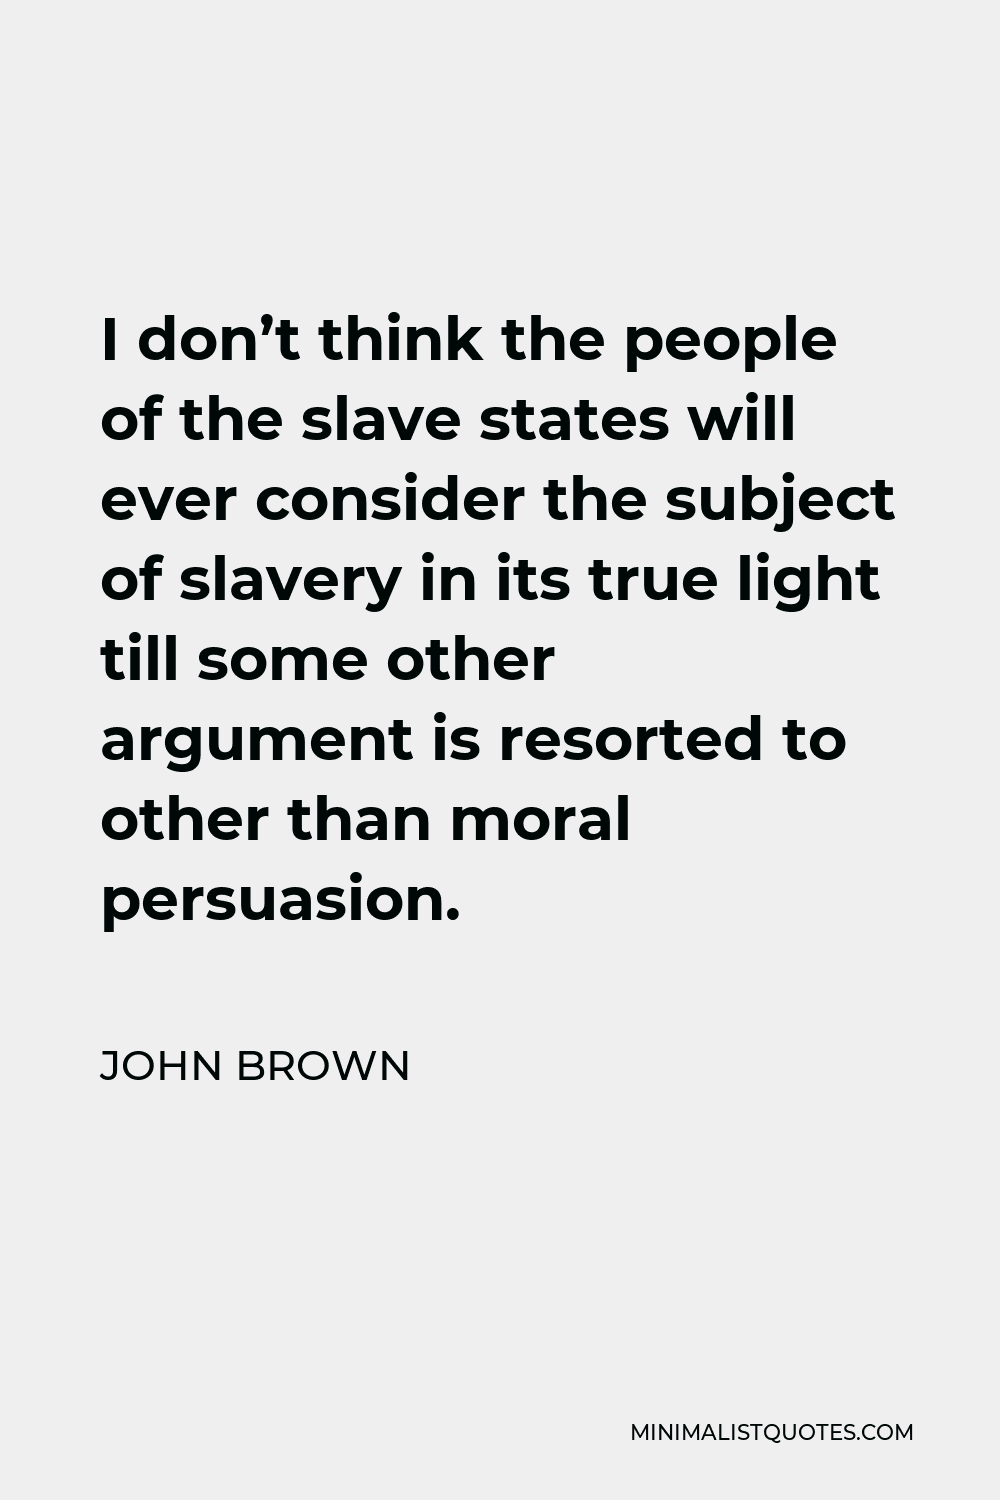 John Brown Quote - I don’t think the people of the slave states will ever consider the subject of slavery in its true light till some other argument is resorted to other than moral persuasion.